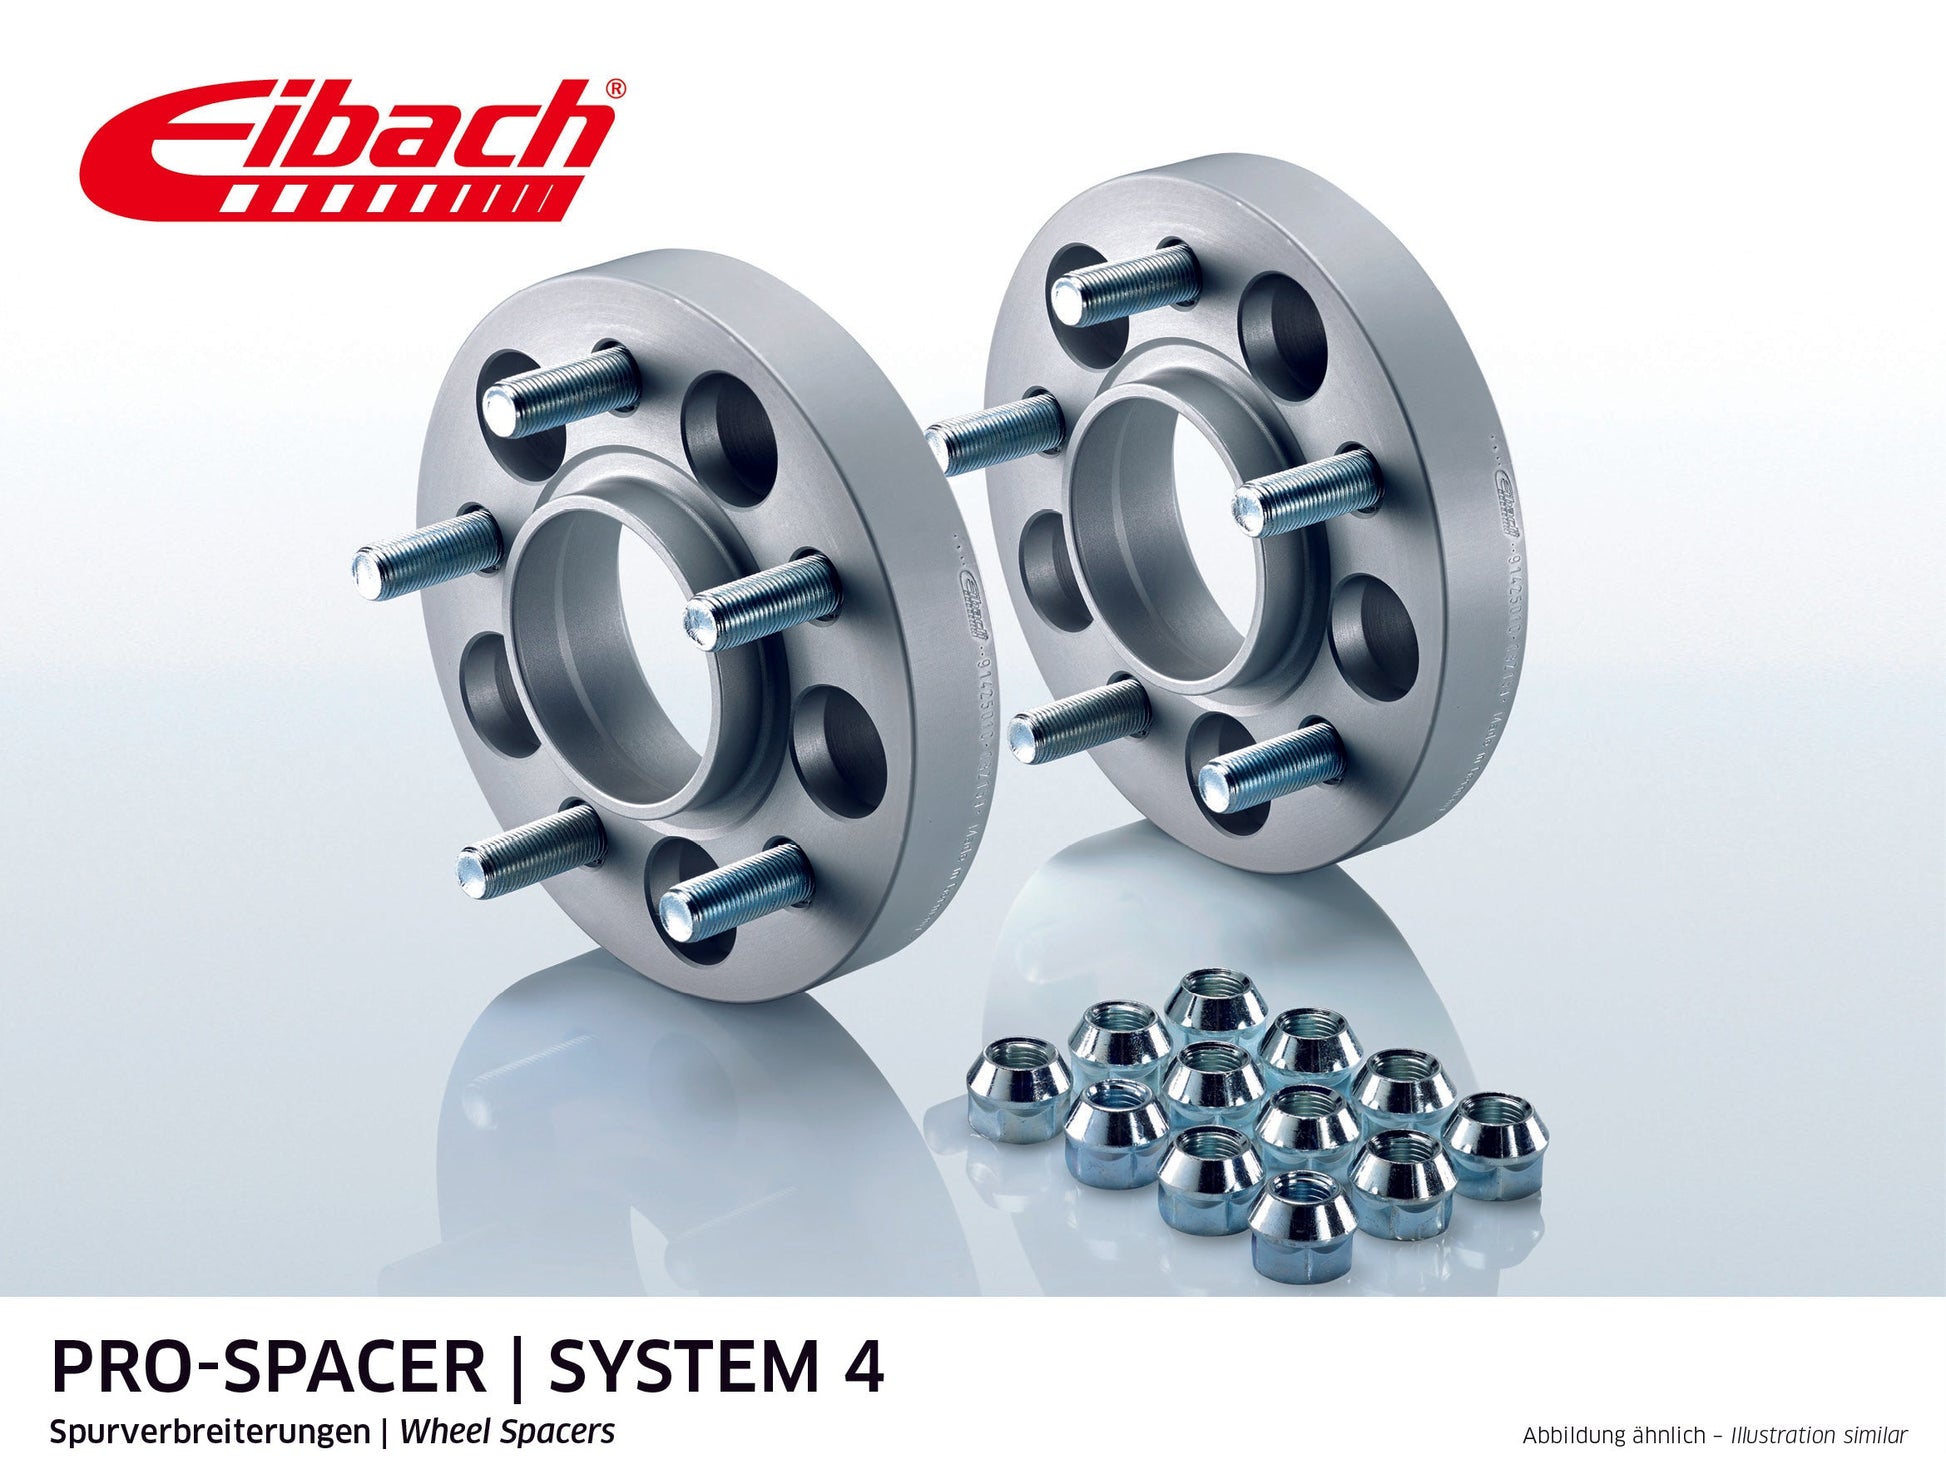 Eibach Pro-Spacer Kit (Pair Of Spacers) 30mm Per Spacer (System 4) S90-4-30-042 (Silver) at £176.66